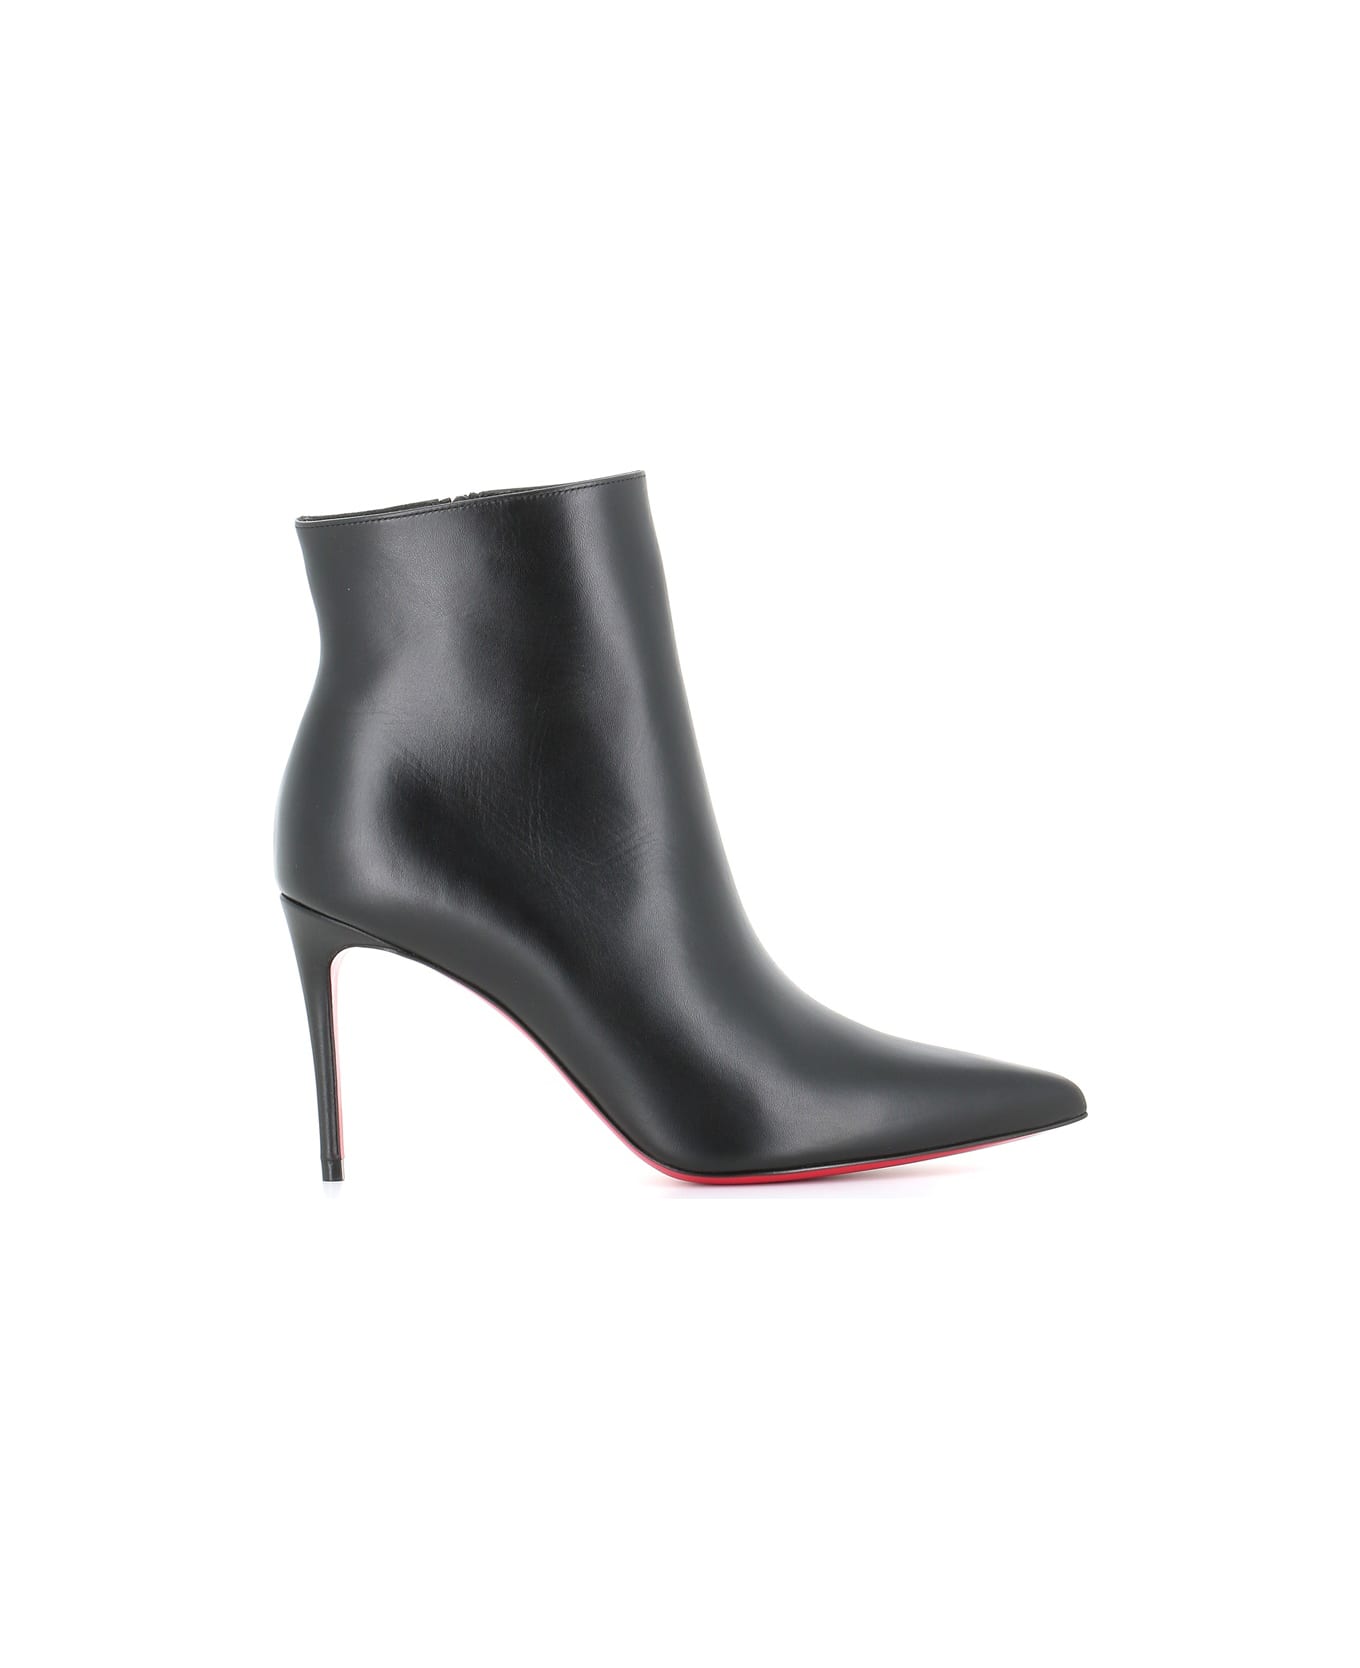 Christian Louboutin Ankle Boot So Kate Booty - Black